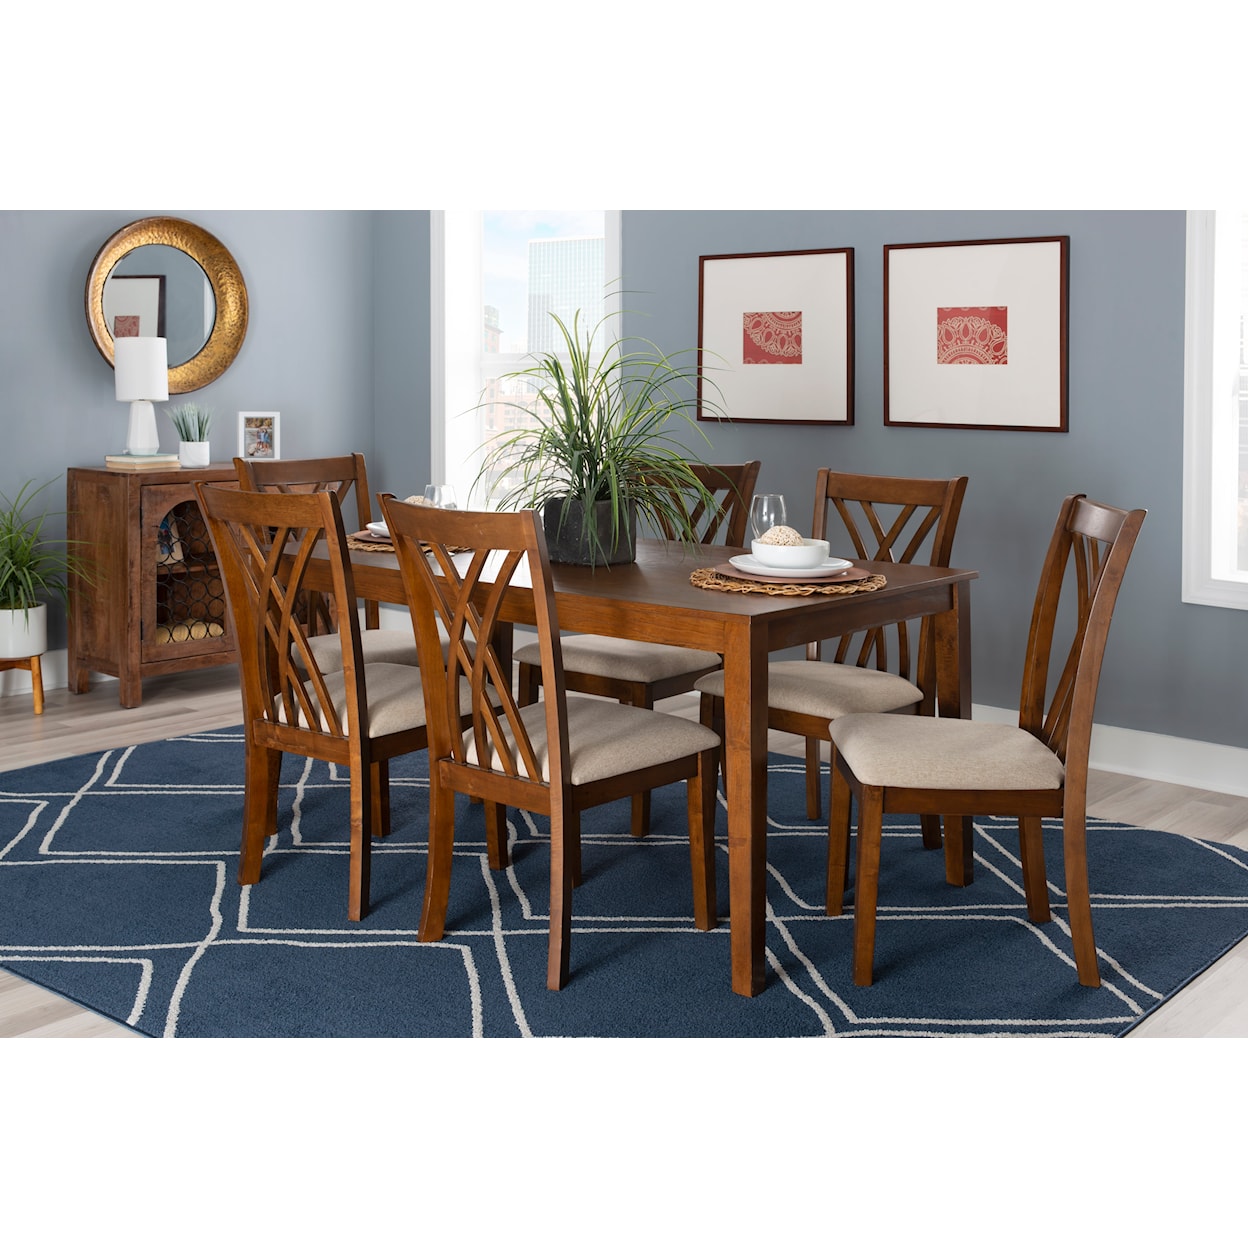 Powell Maggie Maggie 7Pc Dining Set Brown